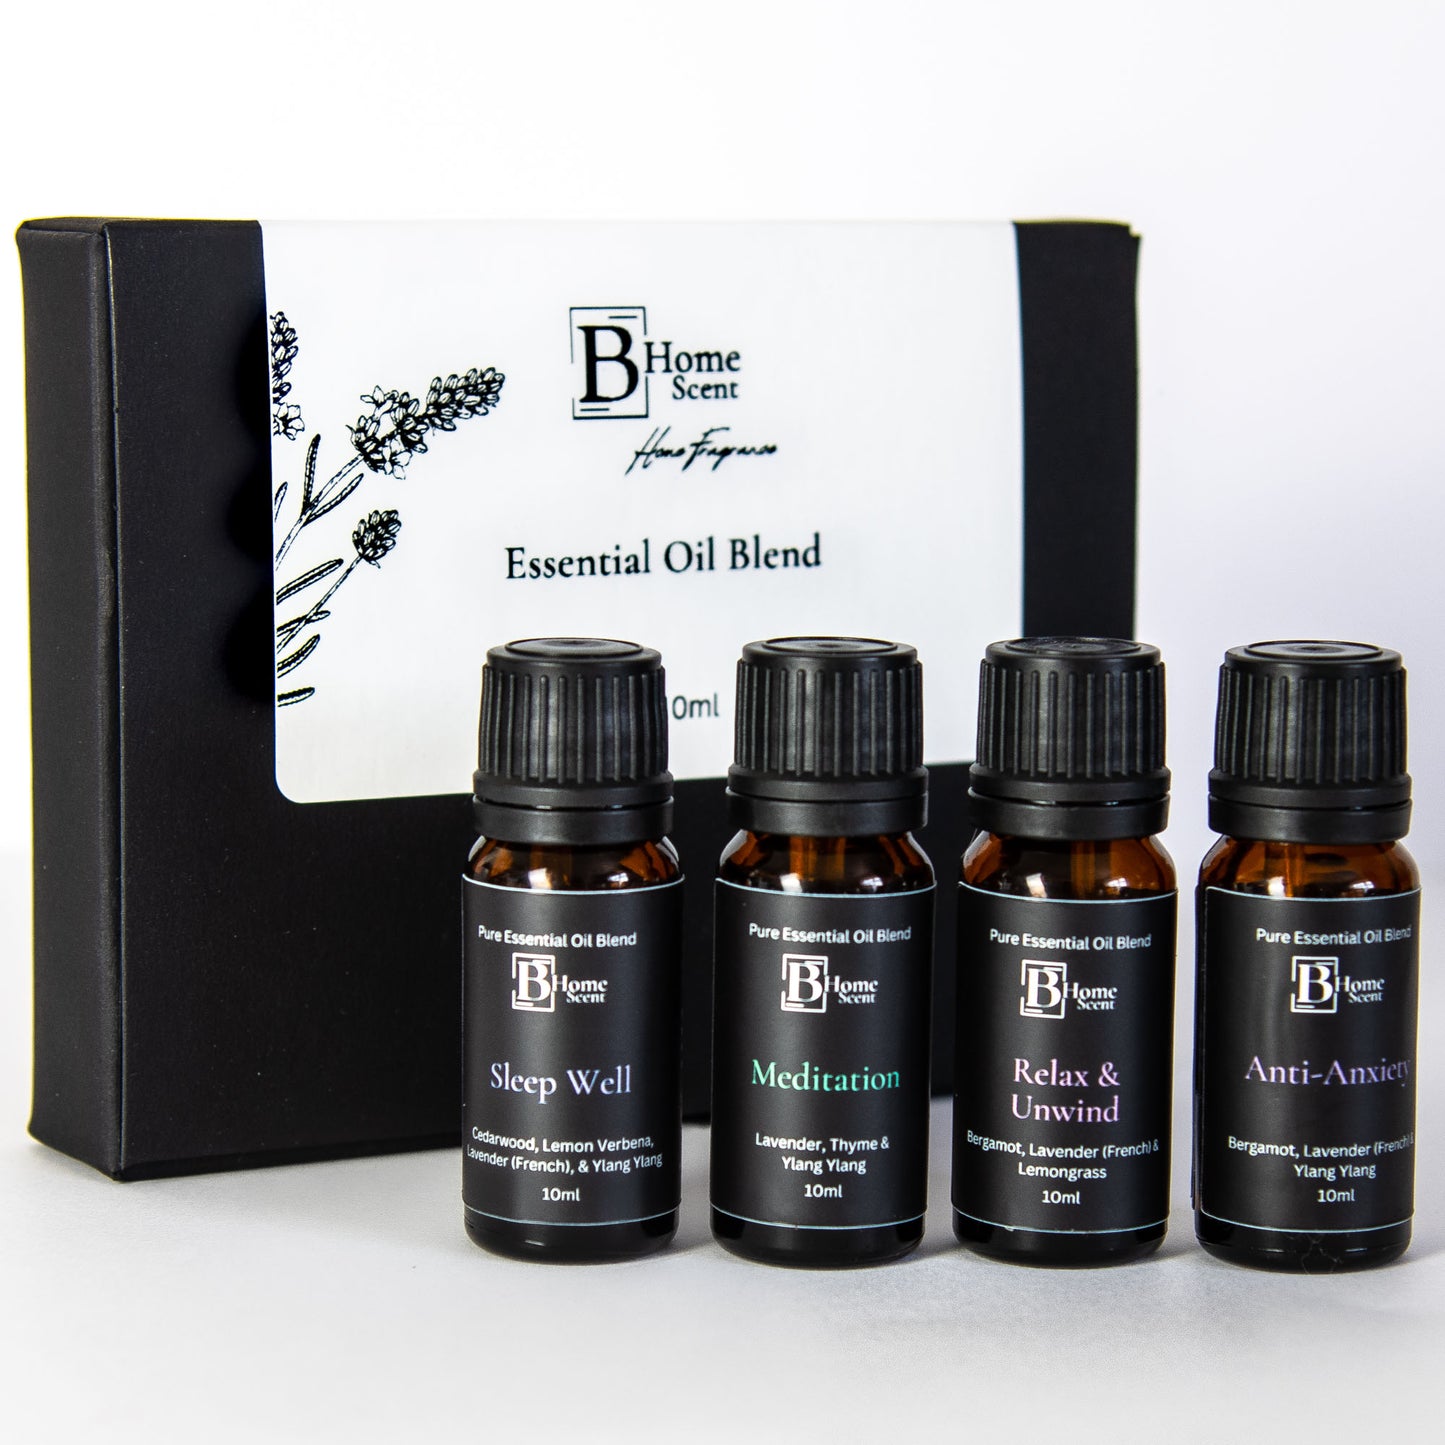 Sleep & Relax Essential Oil Set - Relax & Unwind, Sleep Well, Meditation, Anti - Anxiety - 100% Pure and Natural - Essential Oils for Diffuser, Home, Aromatherapy, Essential Oil Gift Box